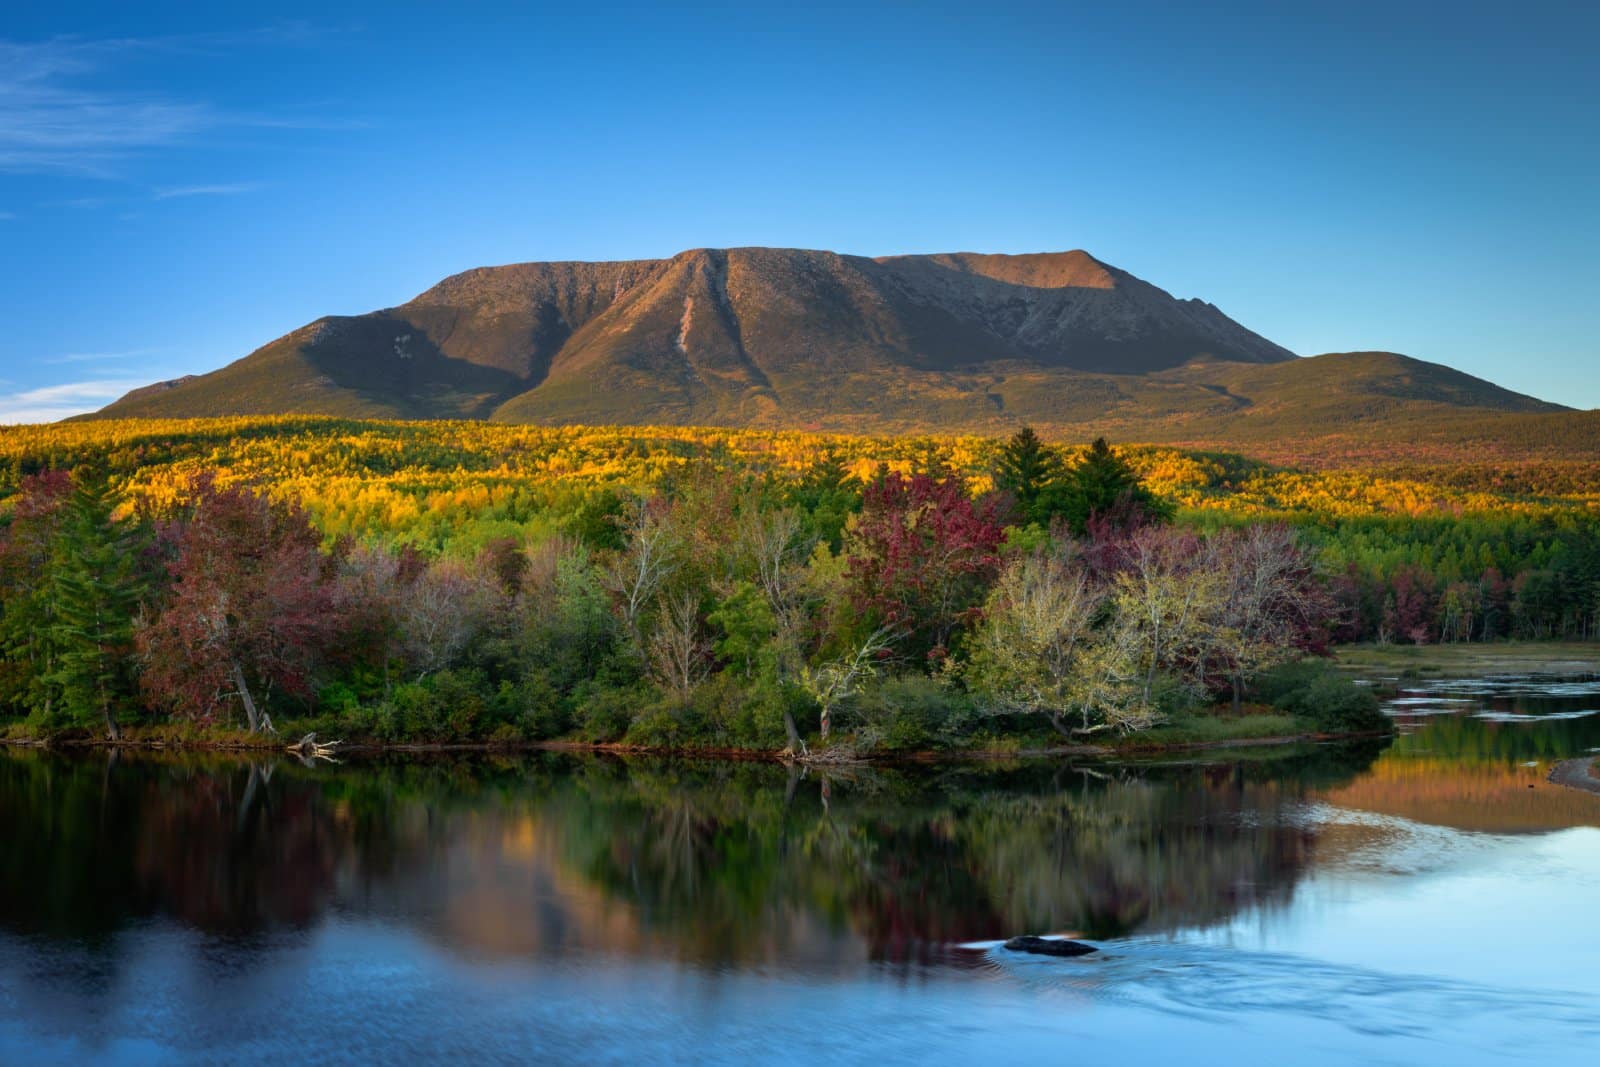 <p class="wp-caption-text">Image Credit: Shutterstock / James Griffiths Photo</p>  <p>For the ultimate wilderness adventure, head to Baxter State Park. Home to Mount Katahdin and vast, untouched landscapes, it offers a rugged retreat with options for backcountry camping or staying in rustic cabins. It’s an immersion in nature that’s priceless, yet accessible to those prepared for the great outdoors.</p>